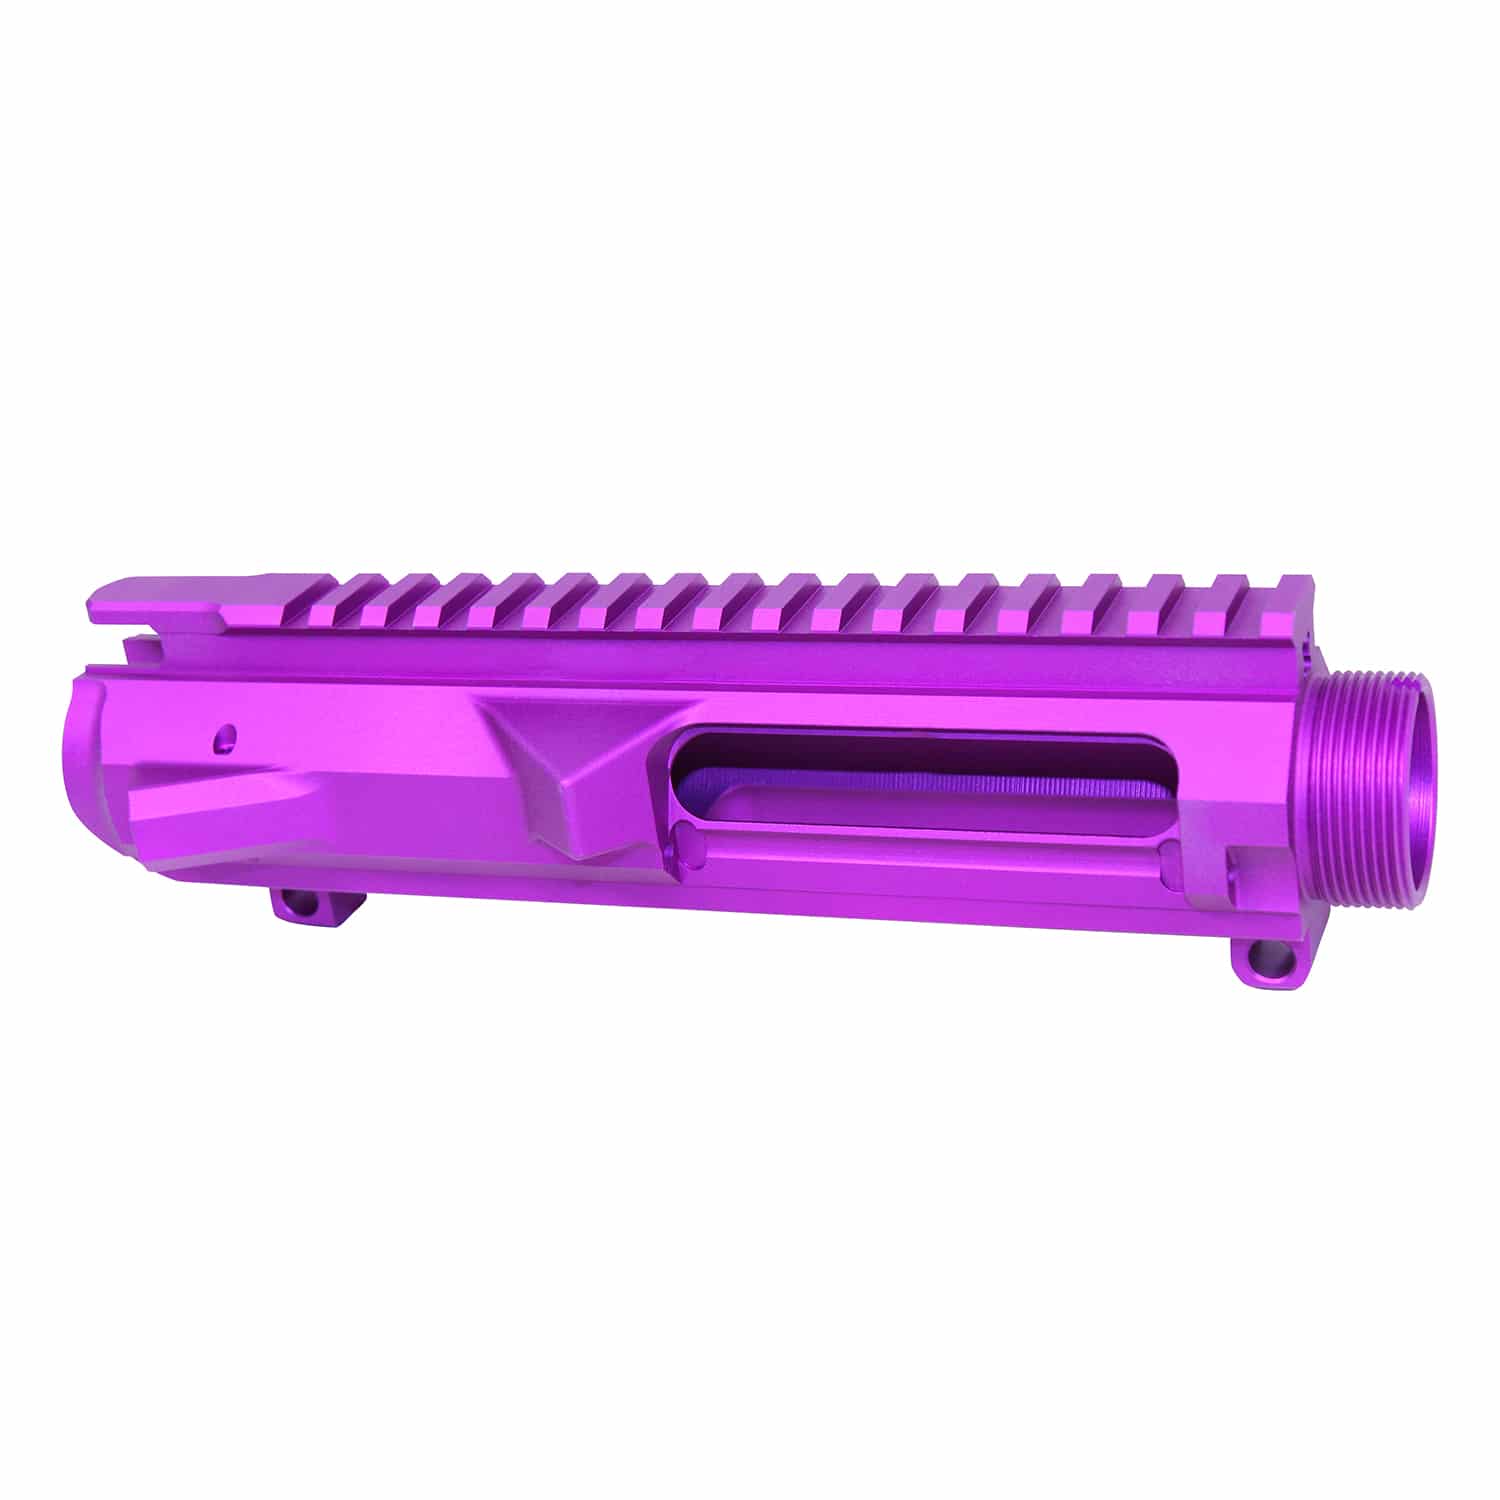 Gen 2 stripped billet upper receiver for .308 Cal, finished in anodized purple.